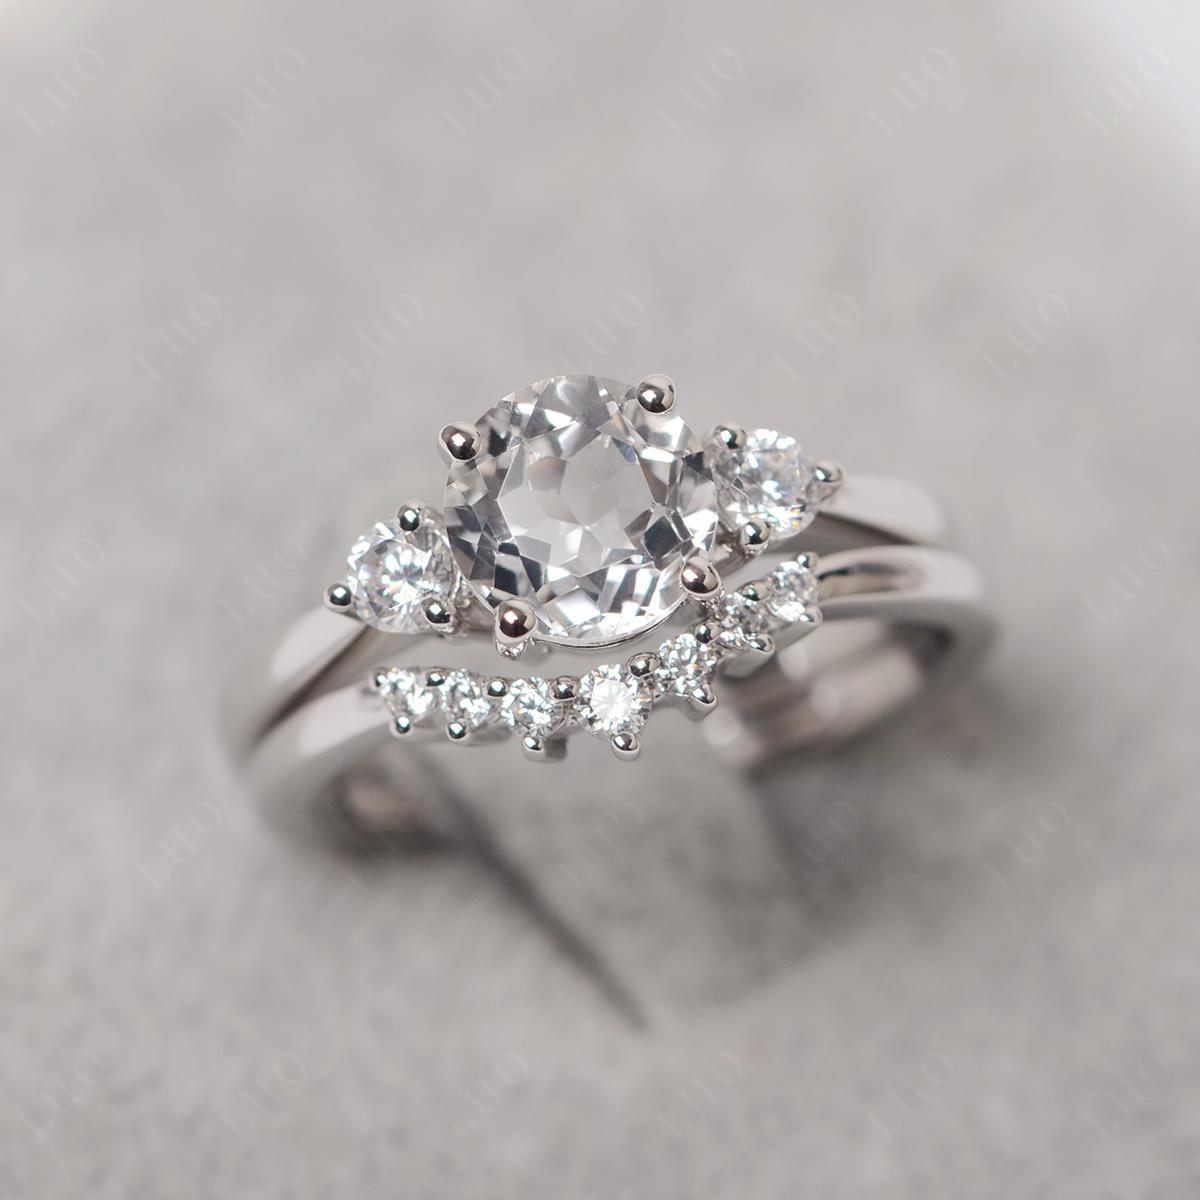 White Topaz Ring Bridal Set Engagement Ring - LUO Jewelry